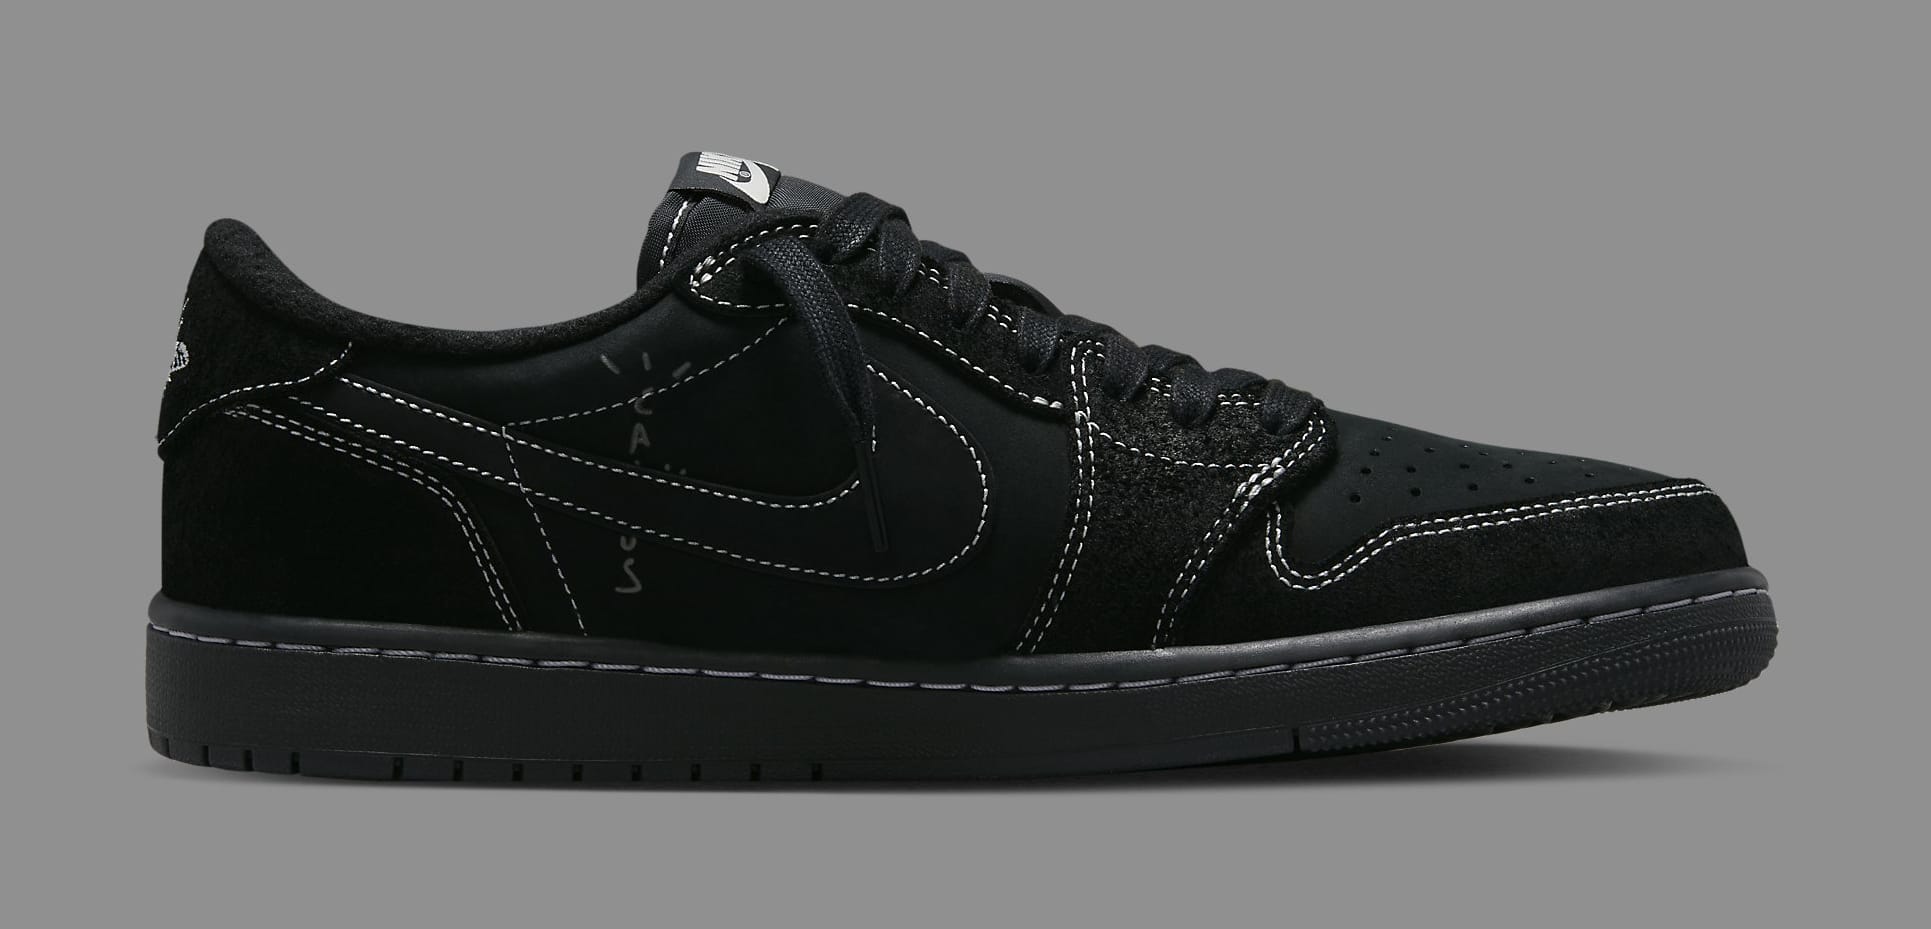 Air Jordan 1 Low x Travis Scott Shoe Collab Is Available: How to Buy –  Footwear News